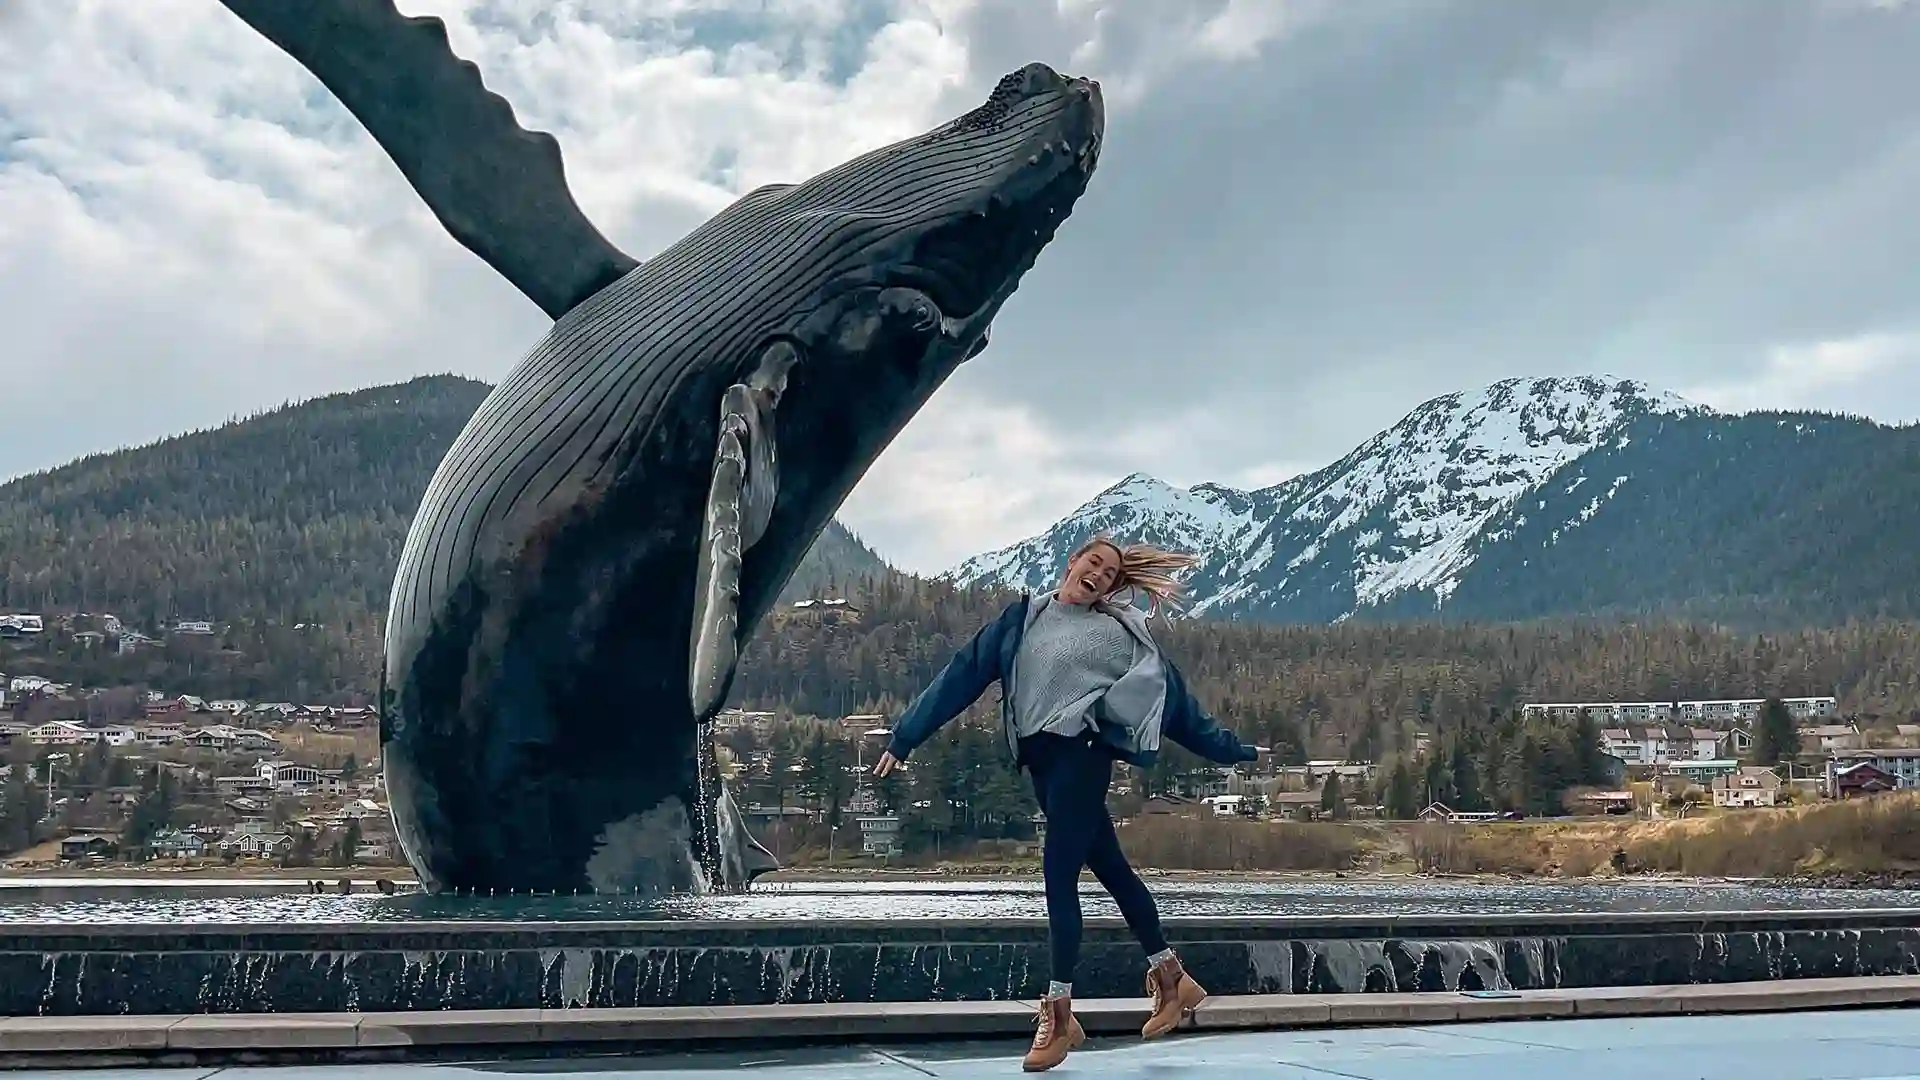 Person jumping in front of whale statue with mountain in background.